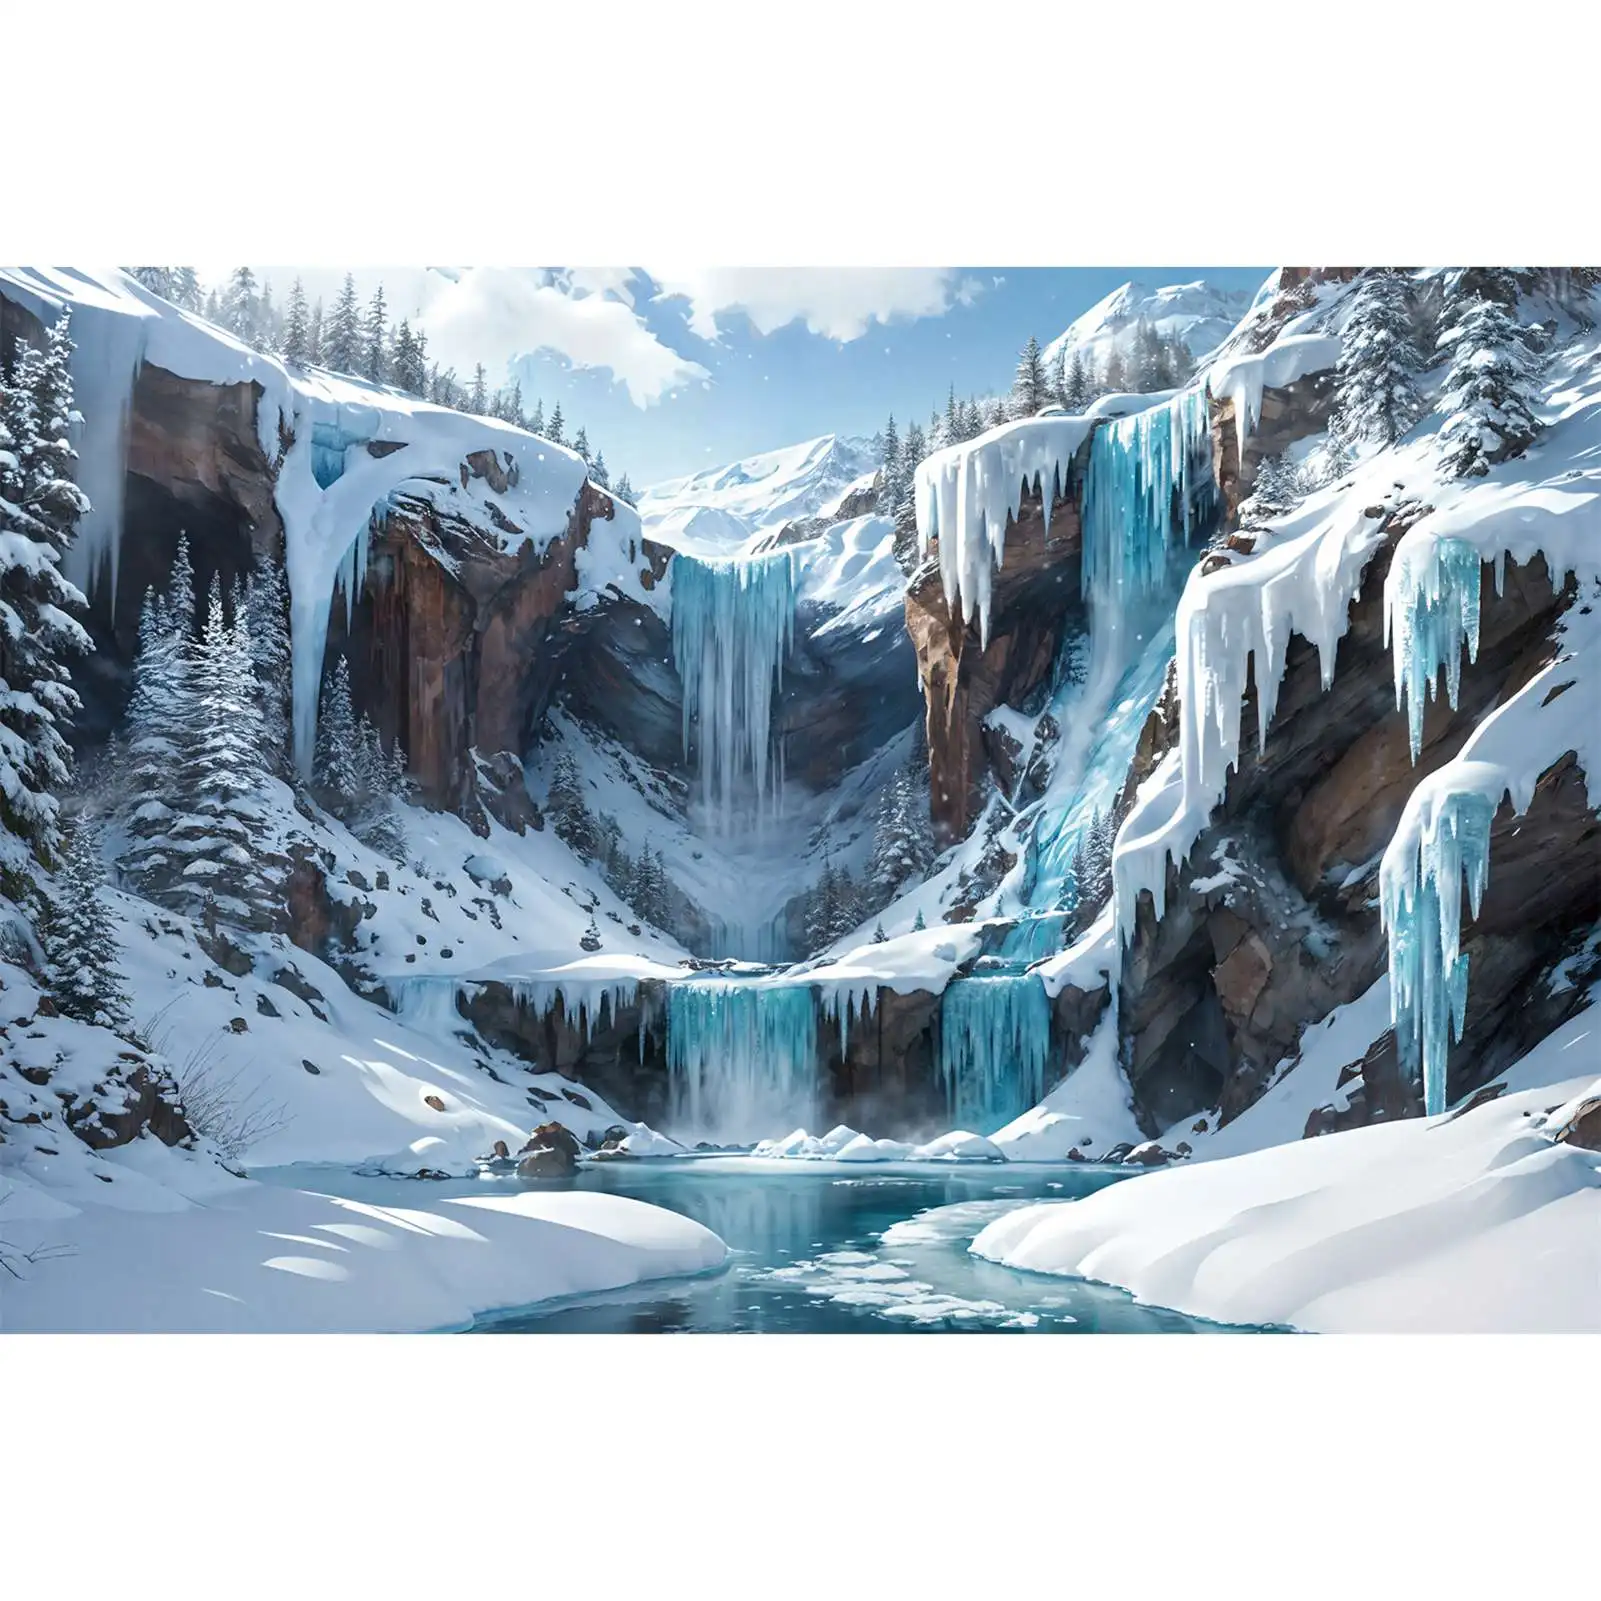 

Frozen Mountains Waterfall Photography Backdrops Decorations Winter Sunshine Custom Baby Photobooth Photographic Backgrounds